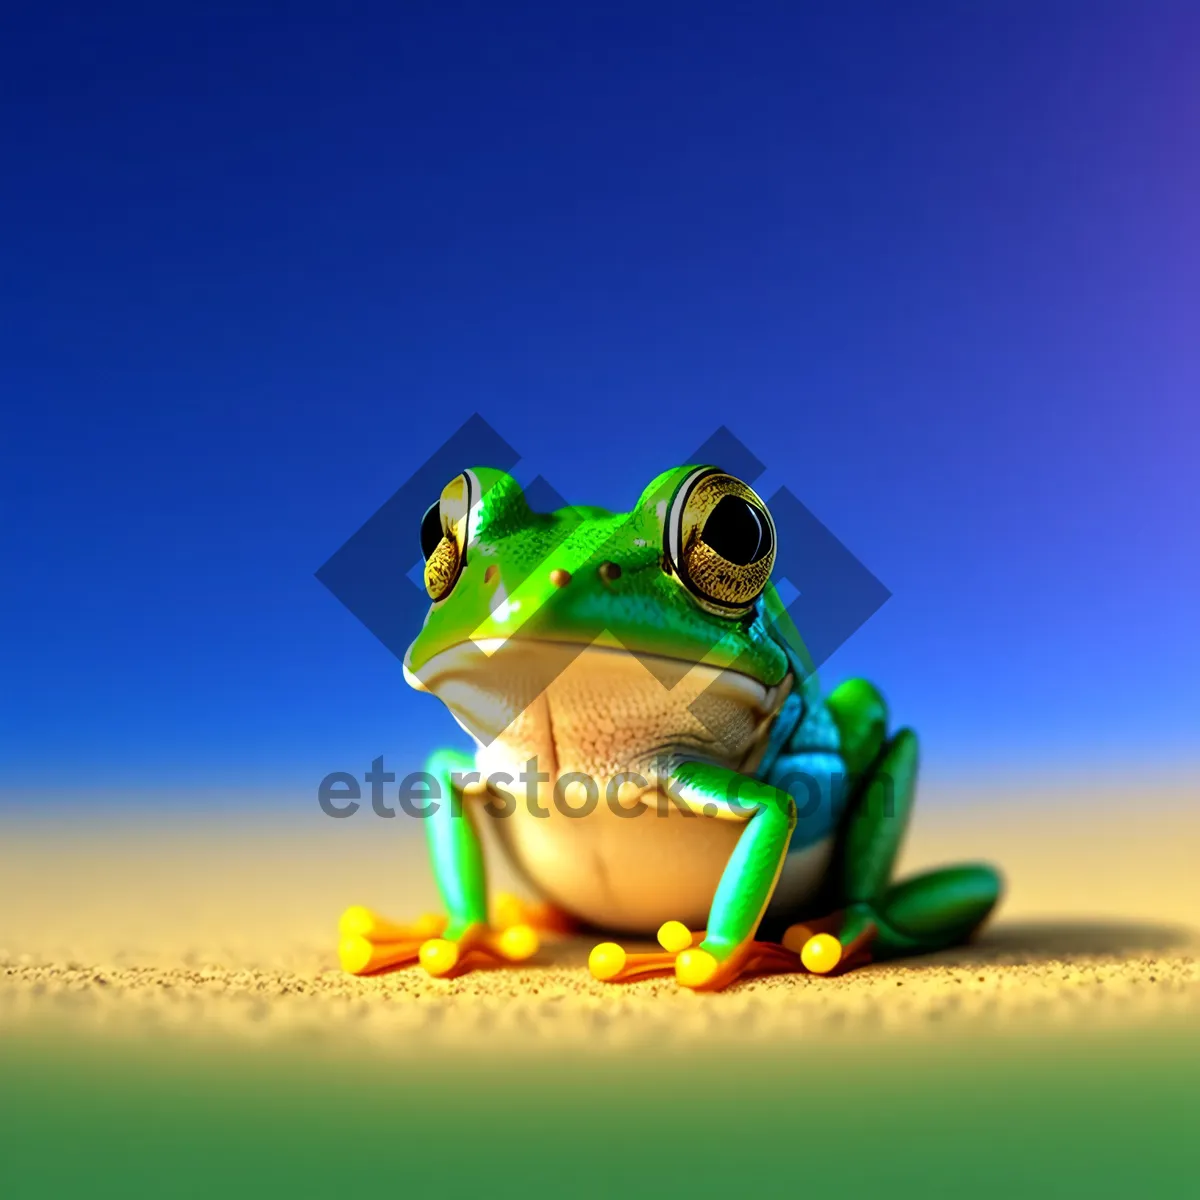 Picture of Vibrant-eyed Tree Frog in its Natural Habitat